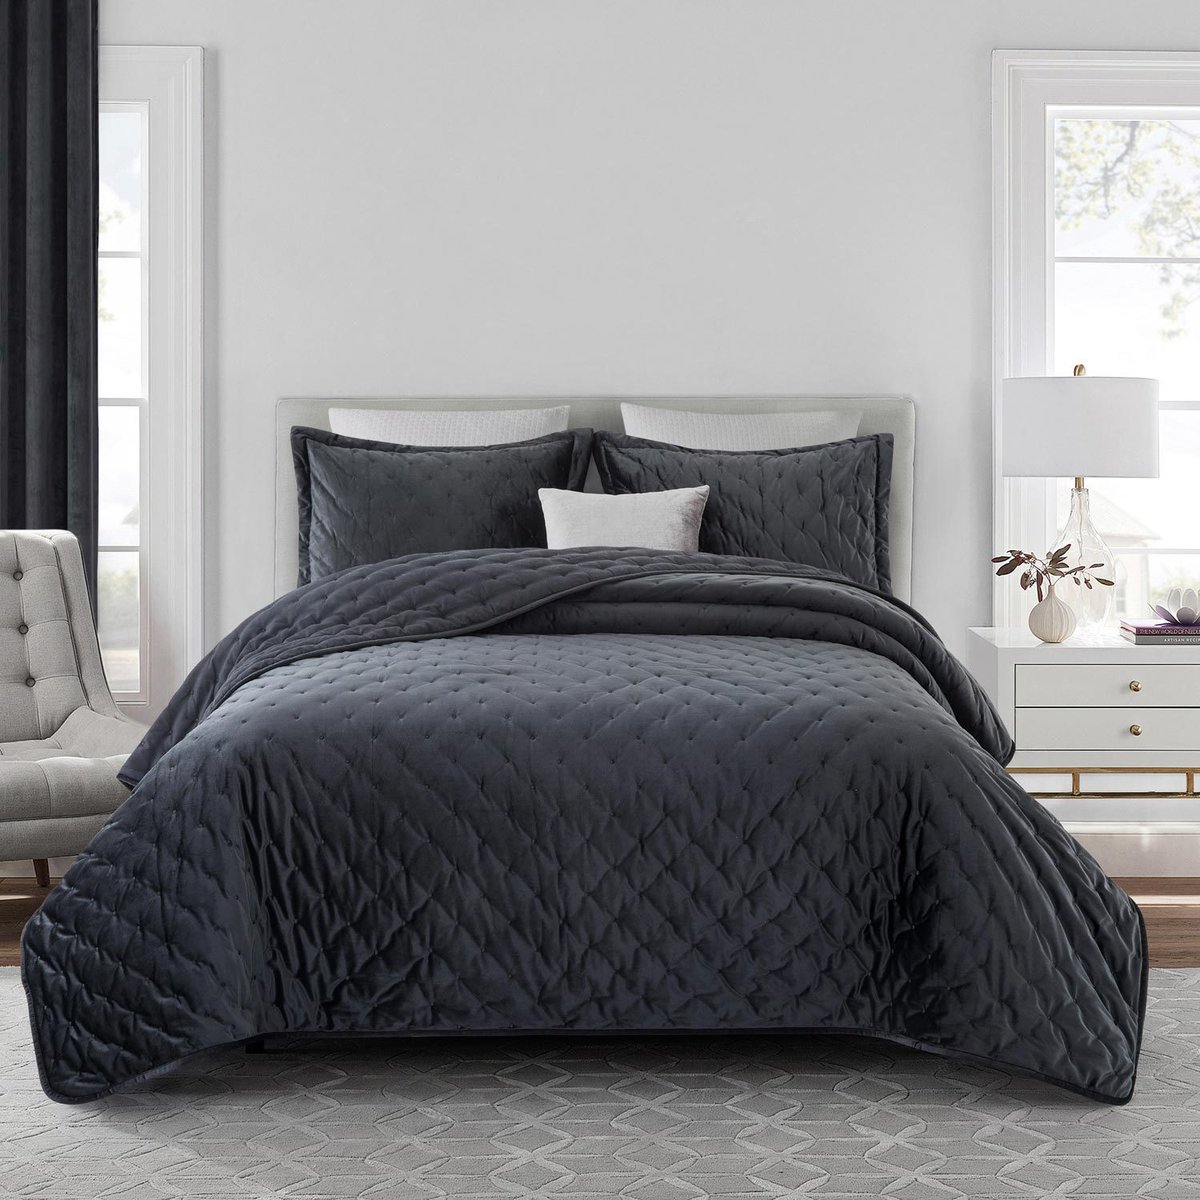 Crushed Velvet Black Bedspread

✅Sizes:Double & King.

✅Available in 8 different colors.

✅Check out at oxfordhomeware.co.uk/products/crush…

#Beddingset
#Bedding
#LuxuryBedding
#UKbedding
#Bedspread
#BlackBedding
#comforter
#velvetbedspread